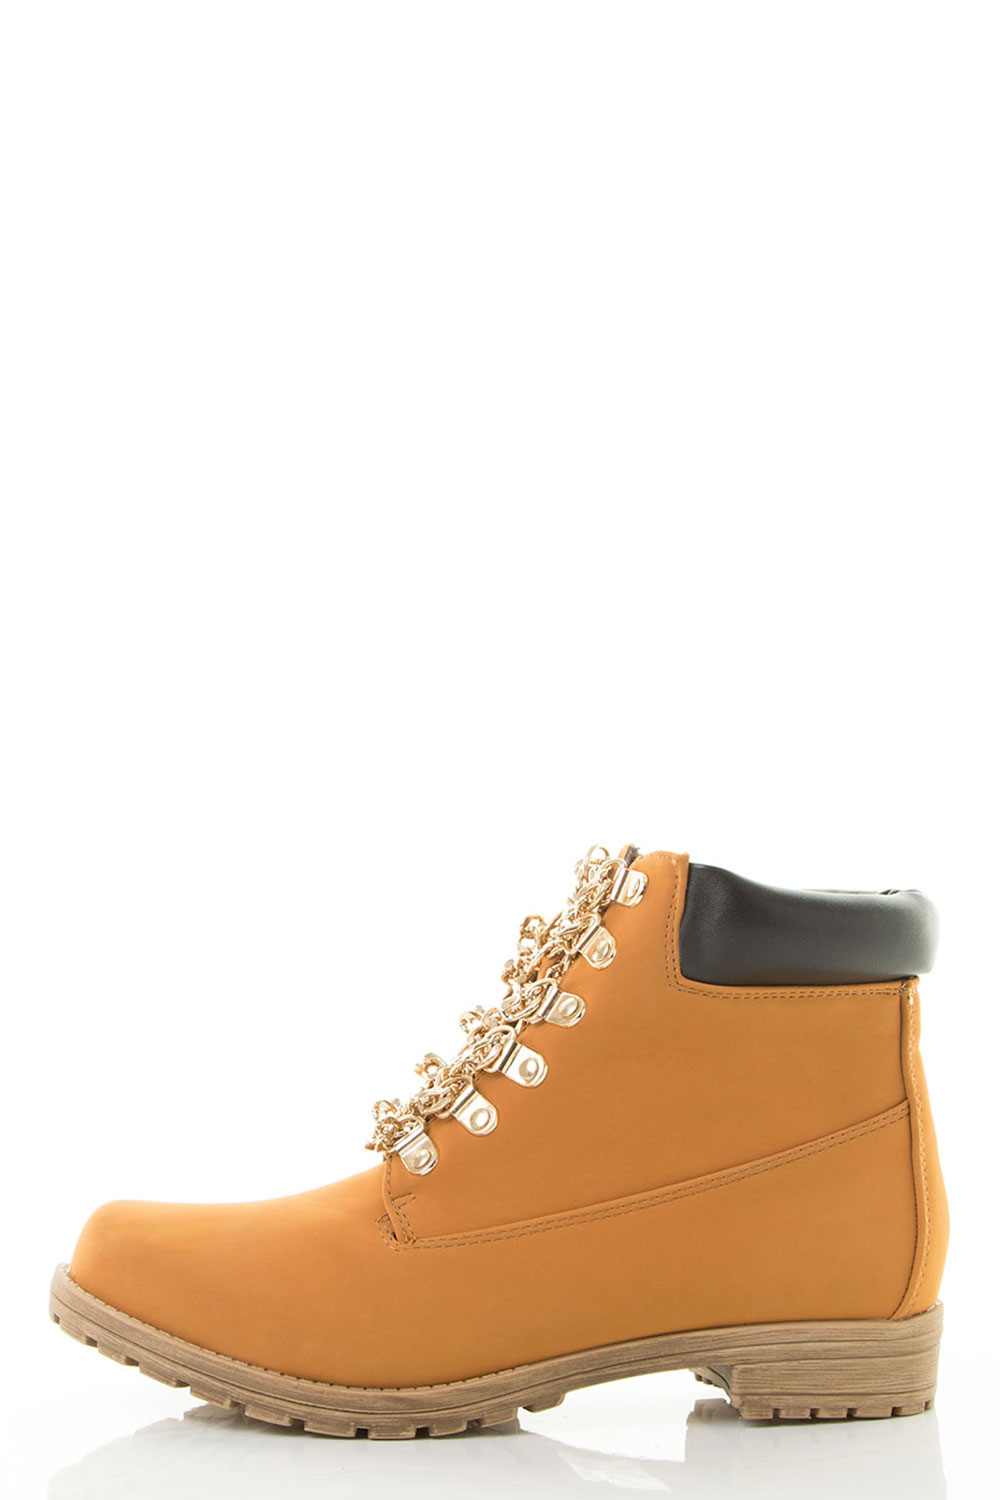 Lace Up Metal Gold Chain Military Combat Booties